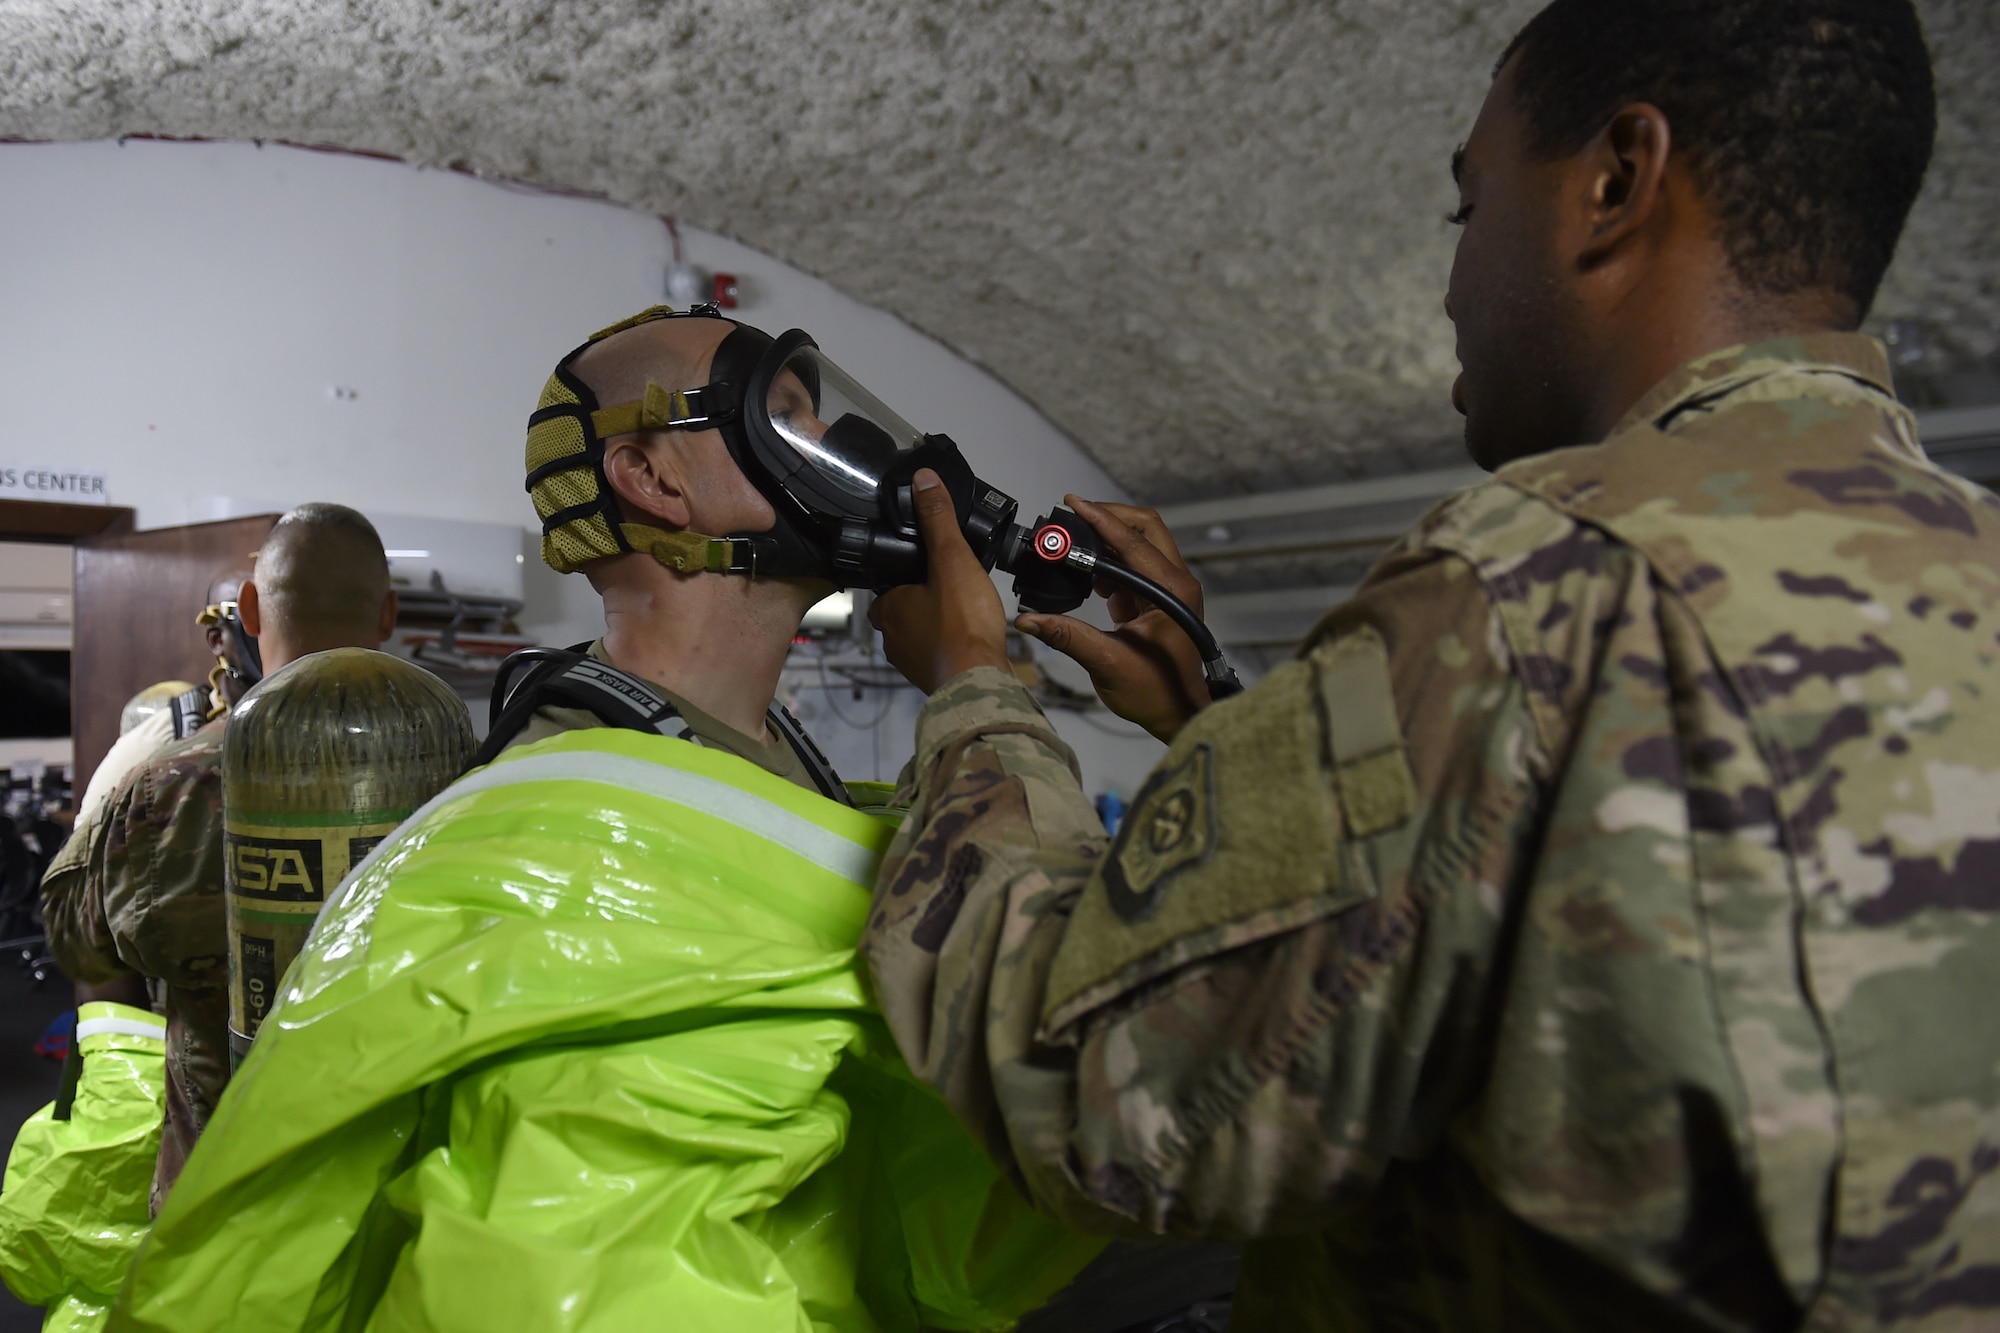 An Airman helps another Airman put on SCBA mask